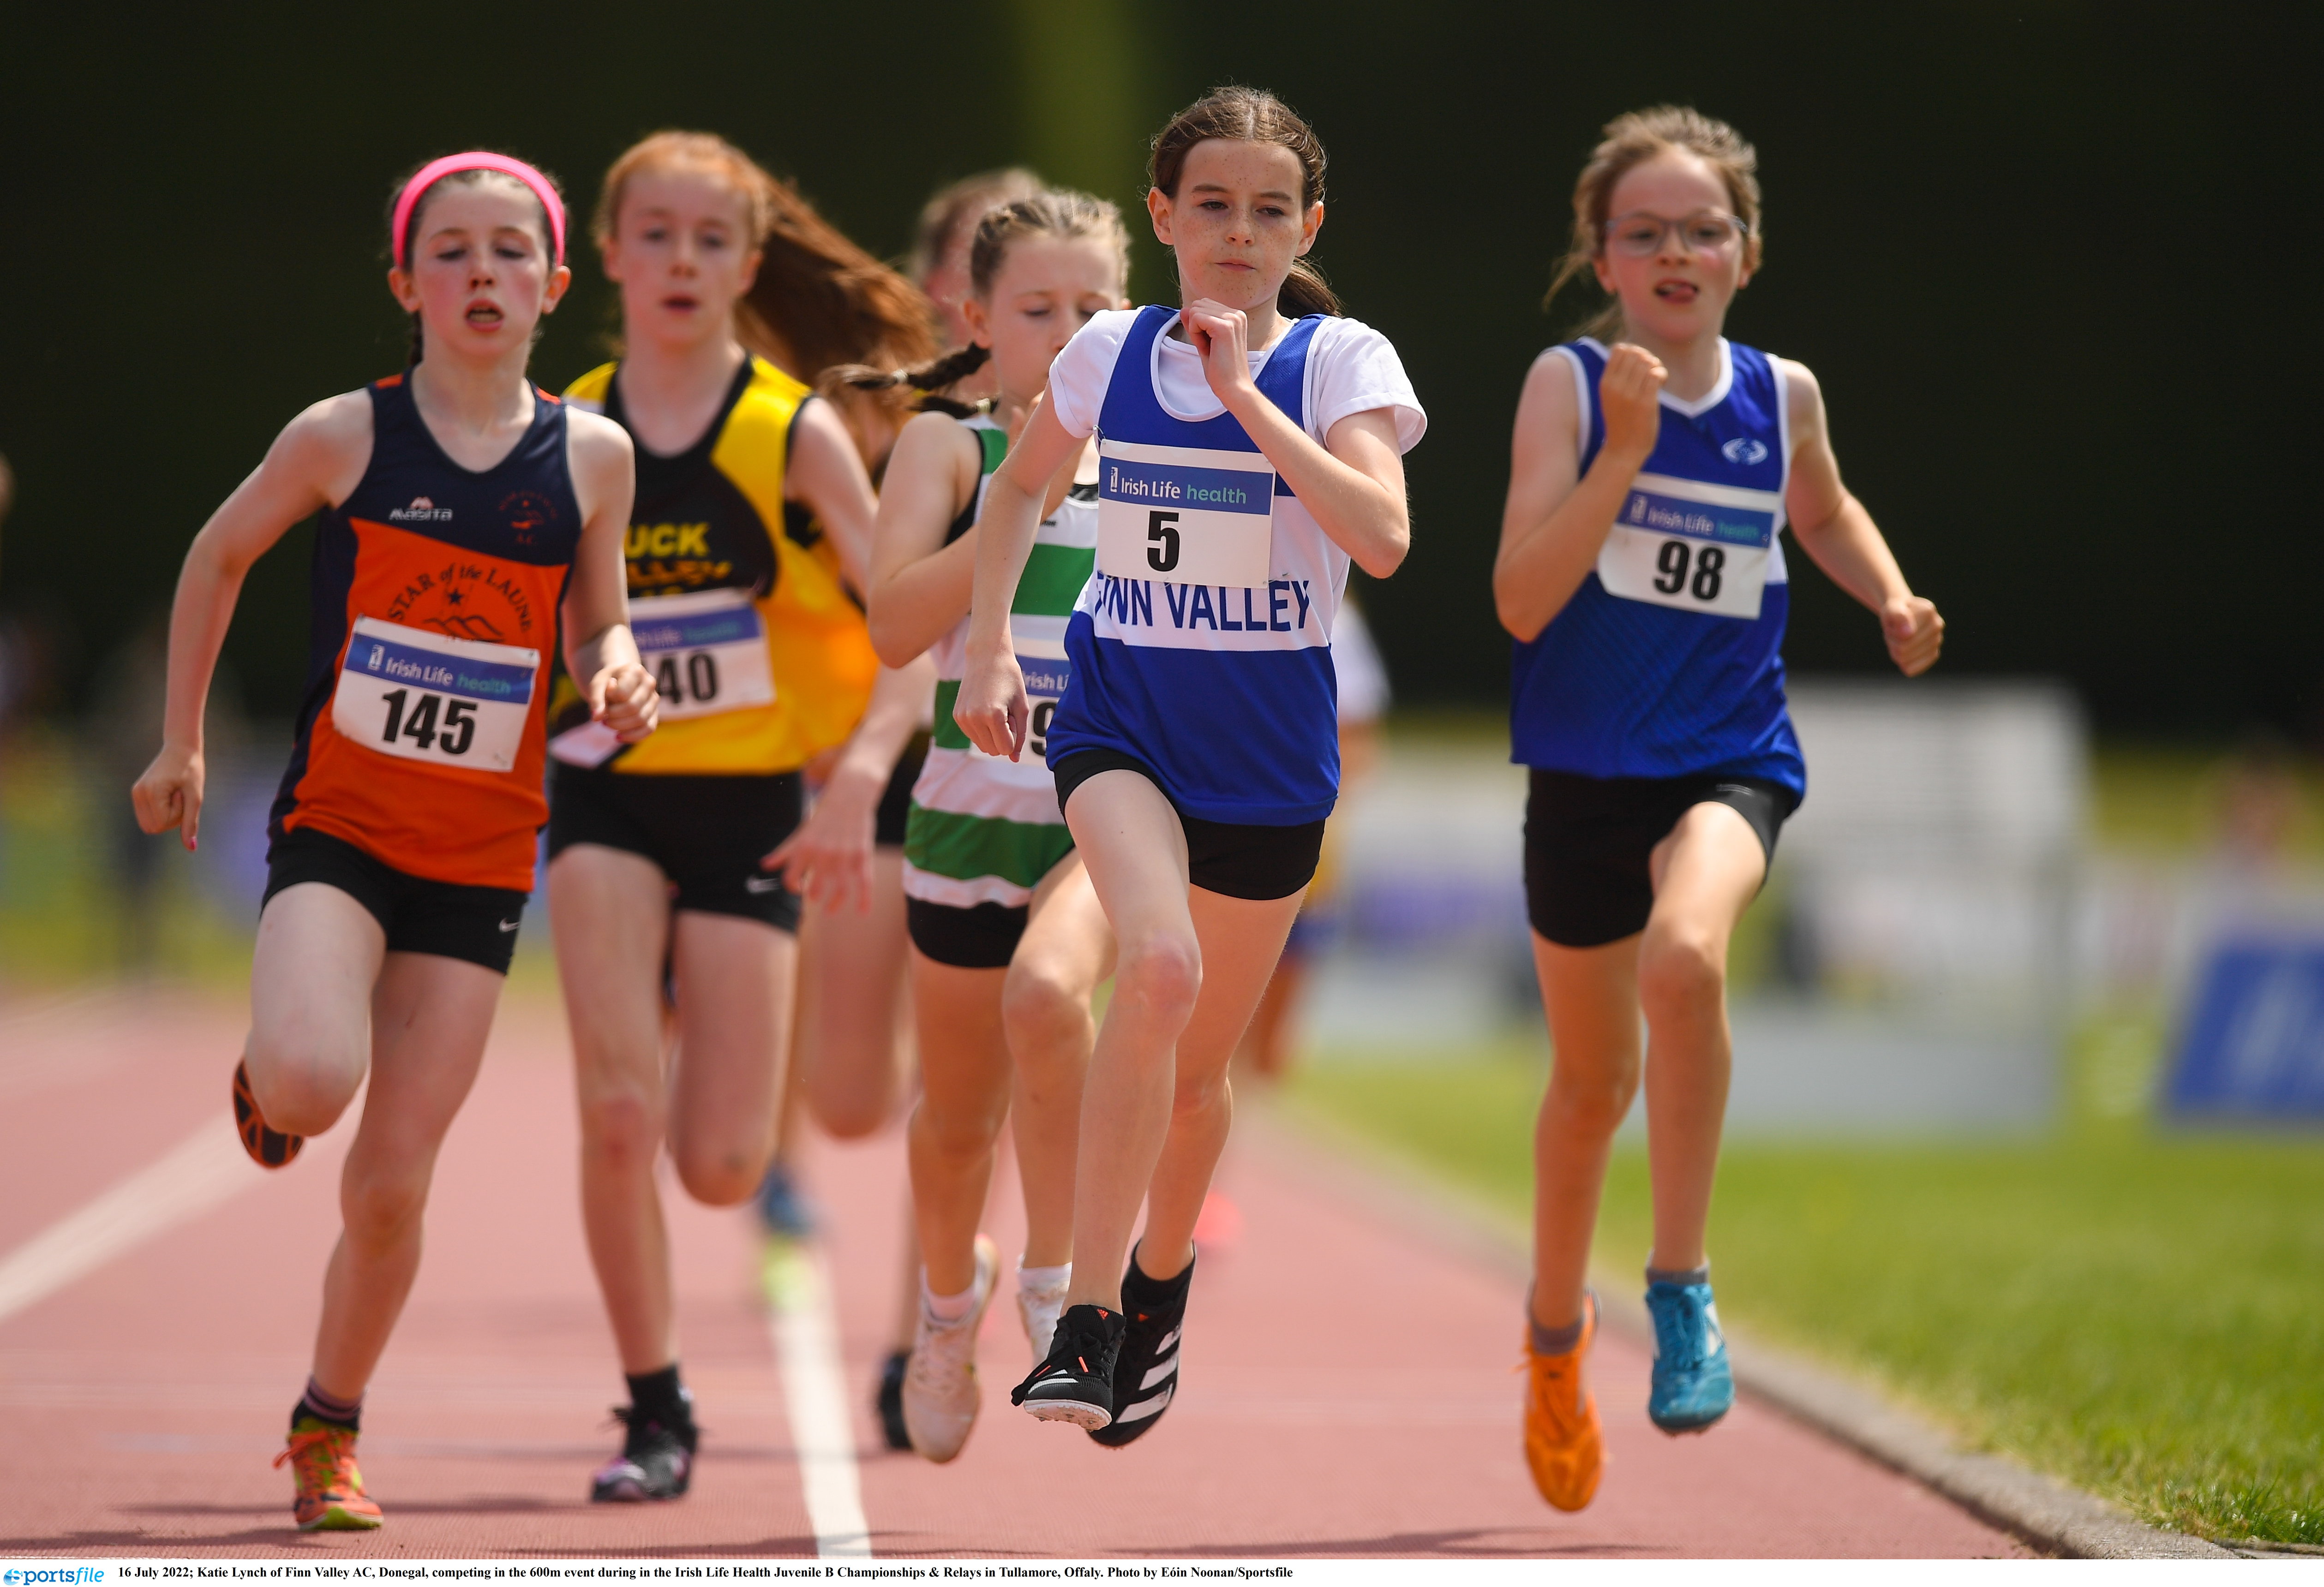 Championship and Relay Action continues in Tullamore